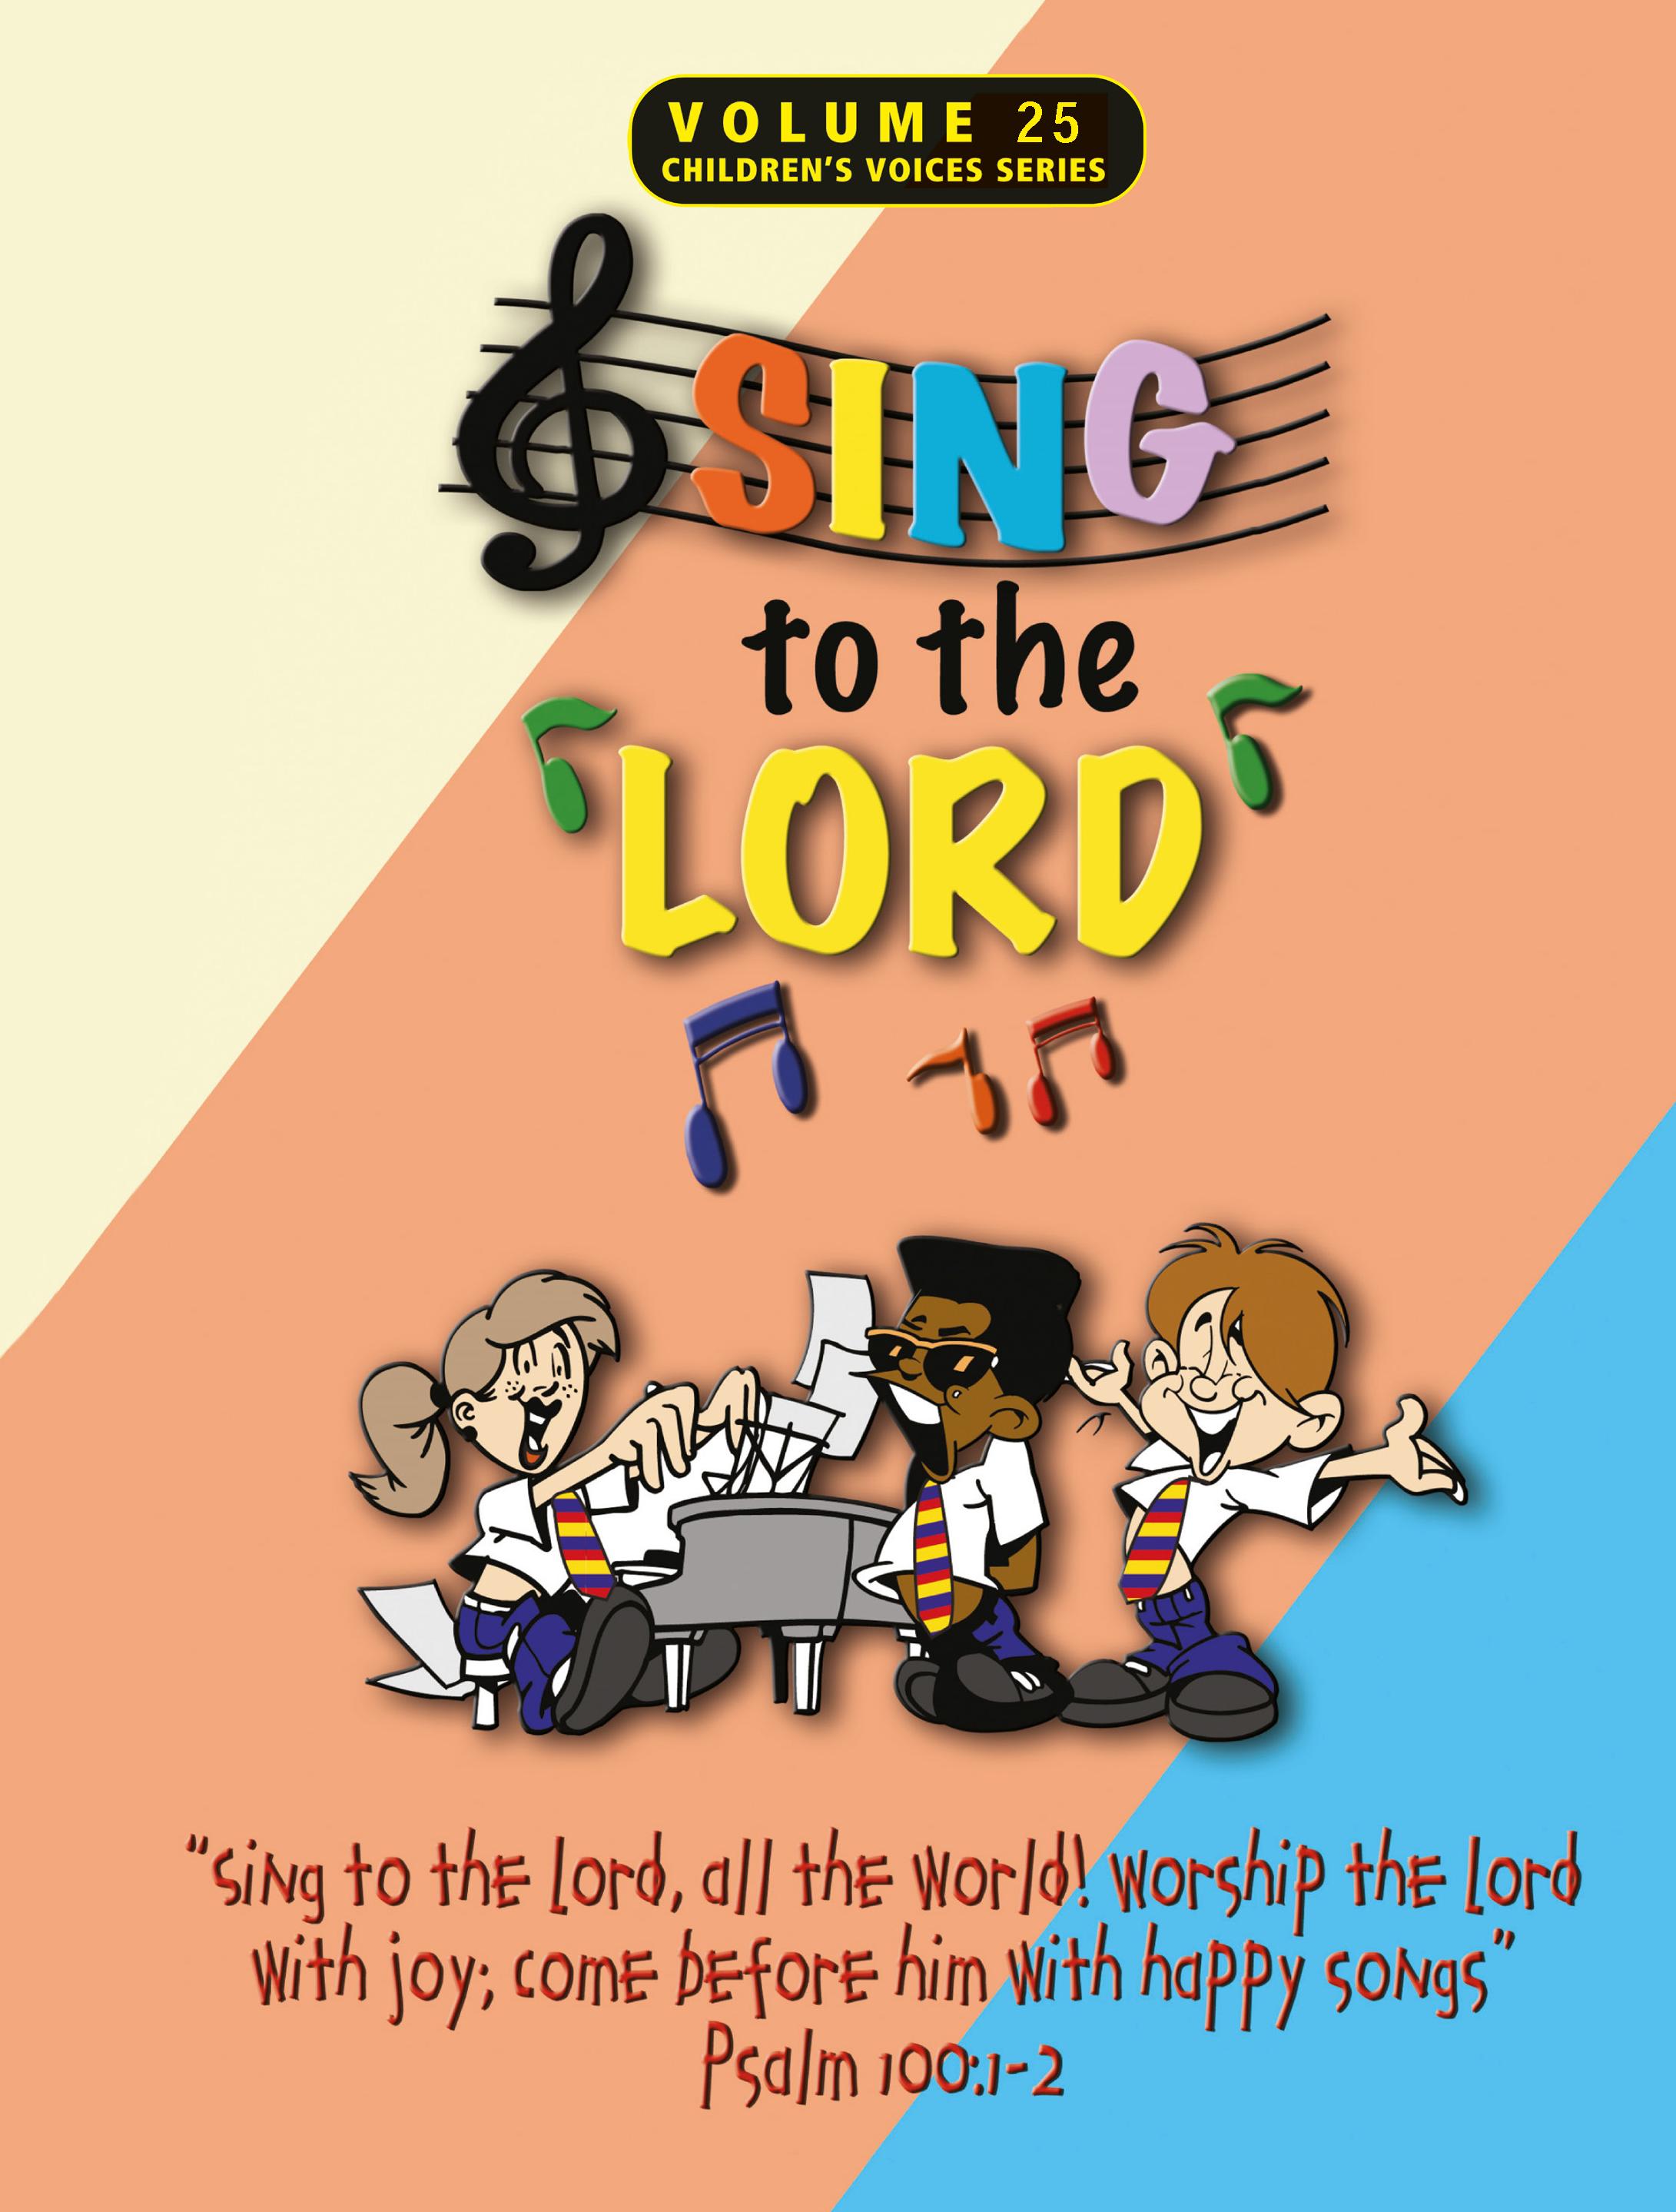 Sing to the Lord, Children's Voices Series, Volume 25